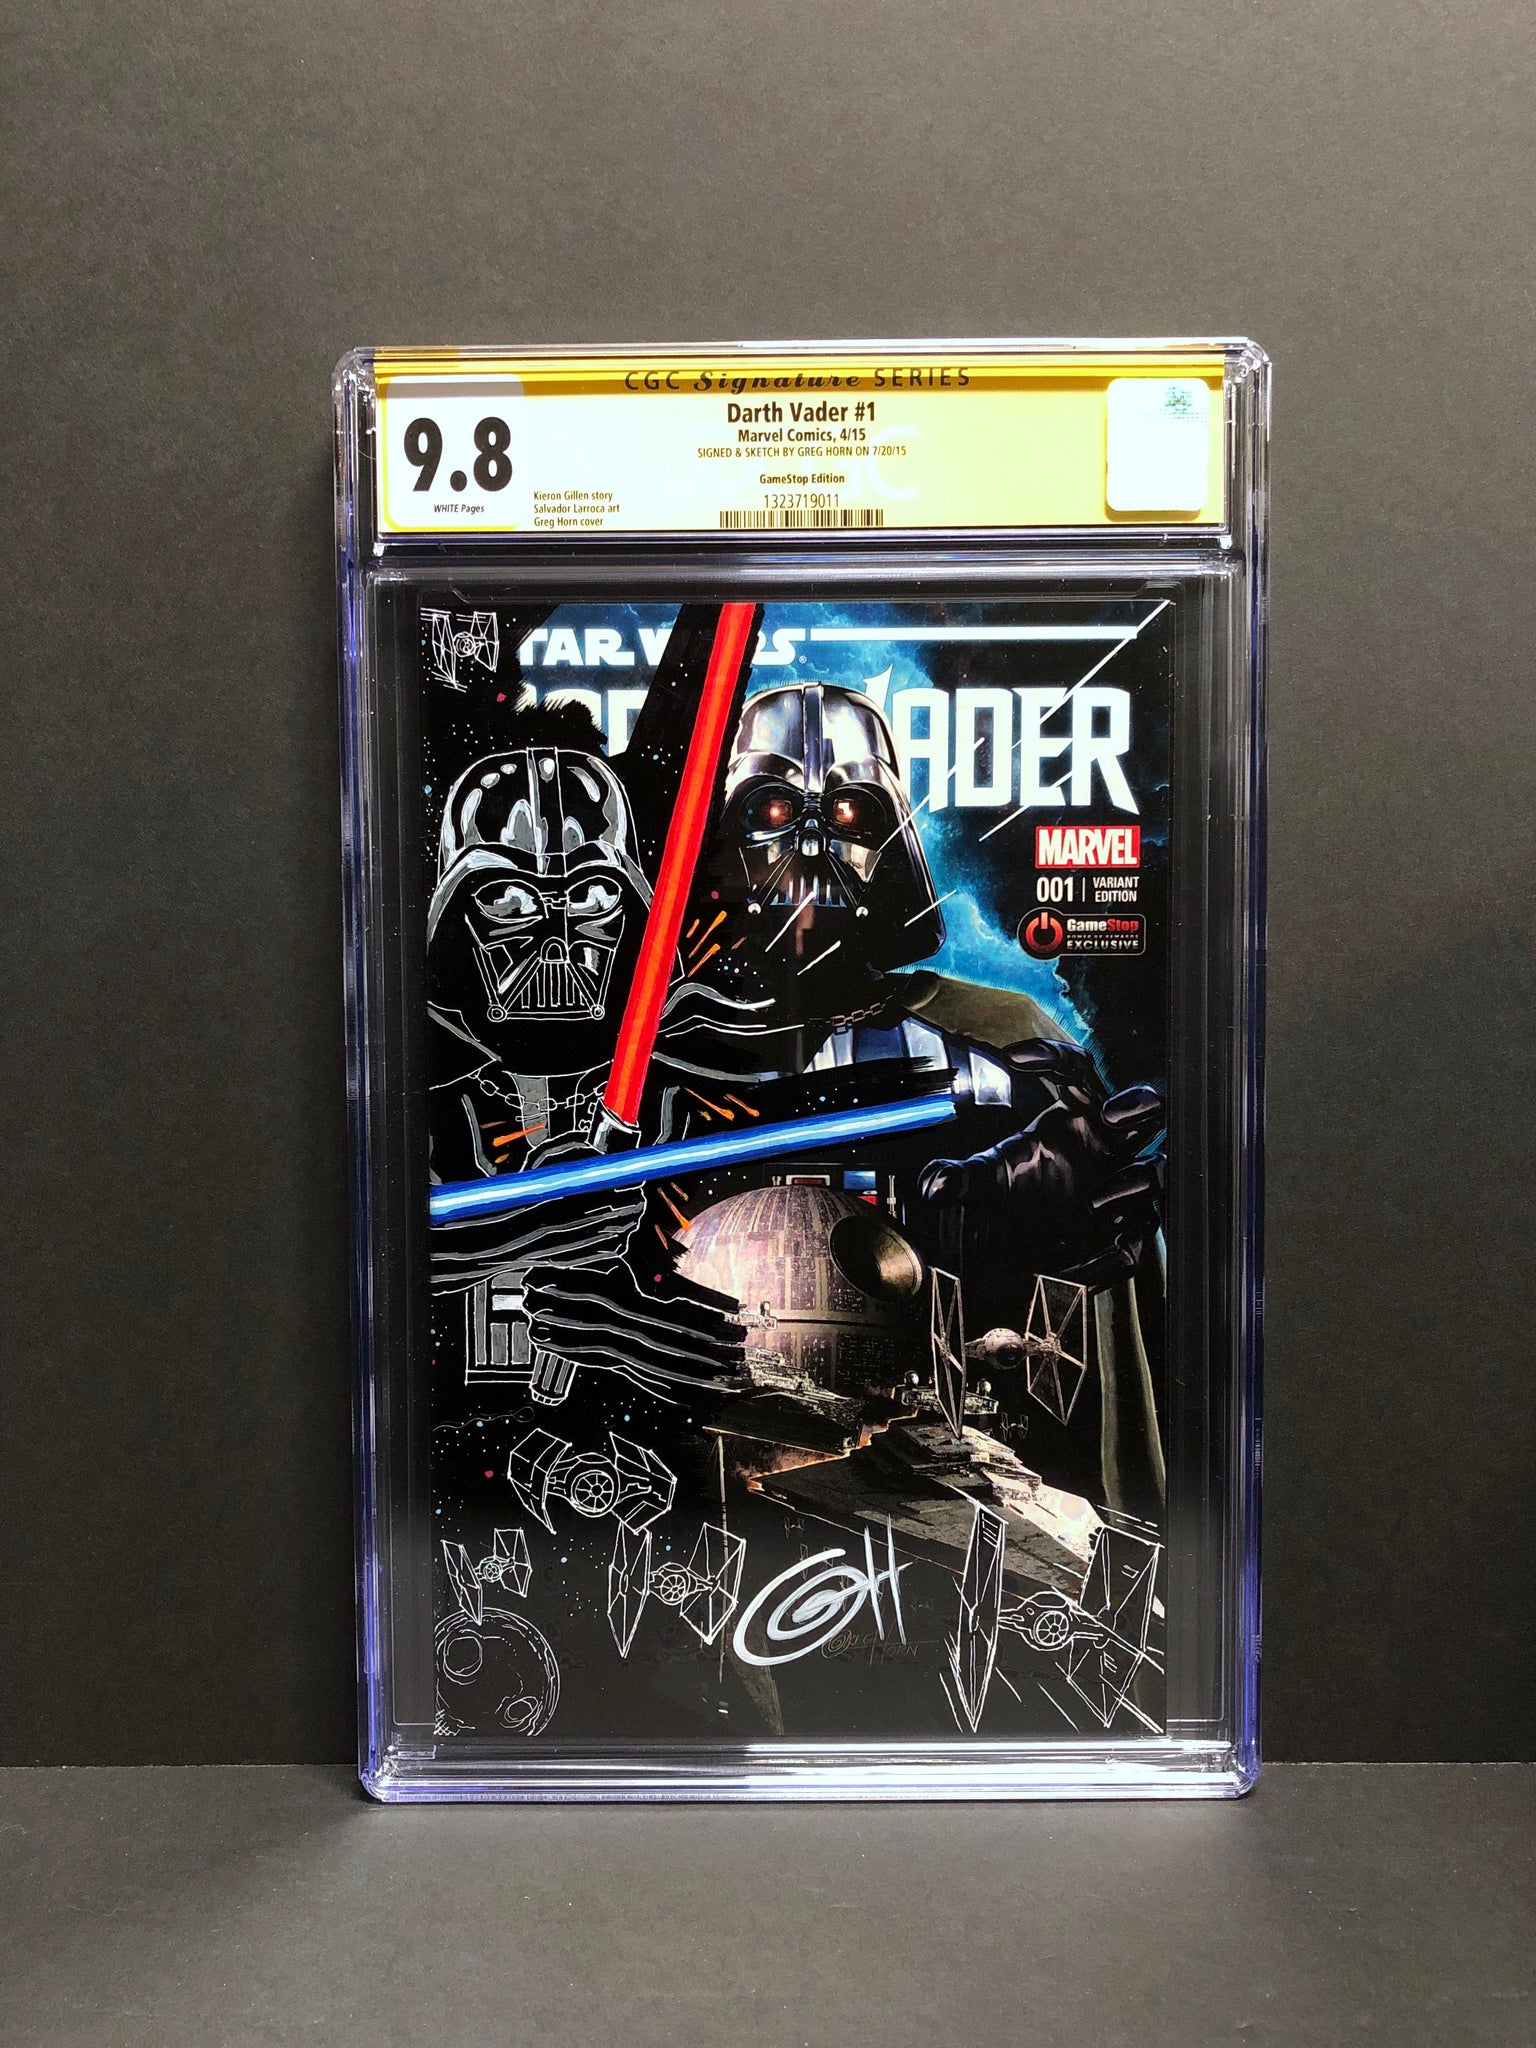 Darth Vader # 1 Game Stop Edition CGC 9.8 SS Signed & Sketched by Greg Horn